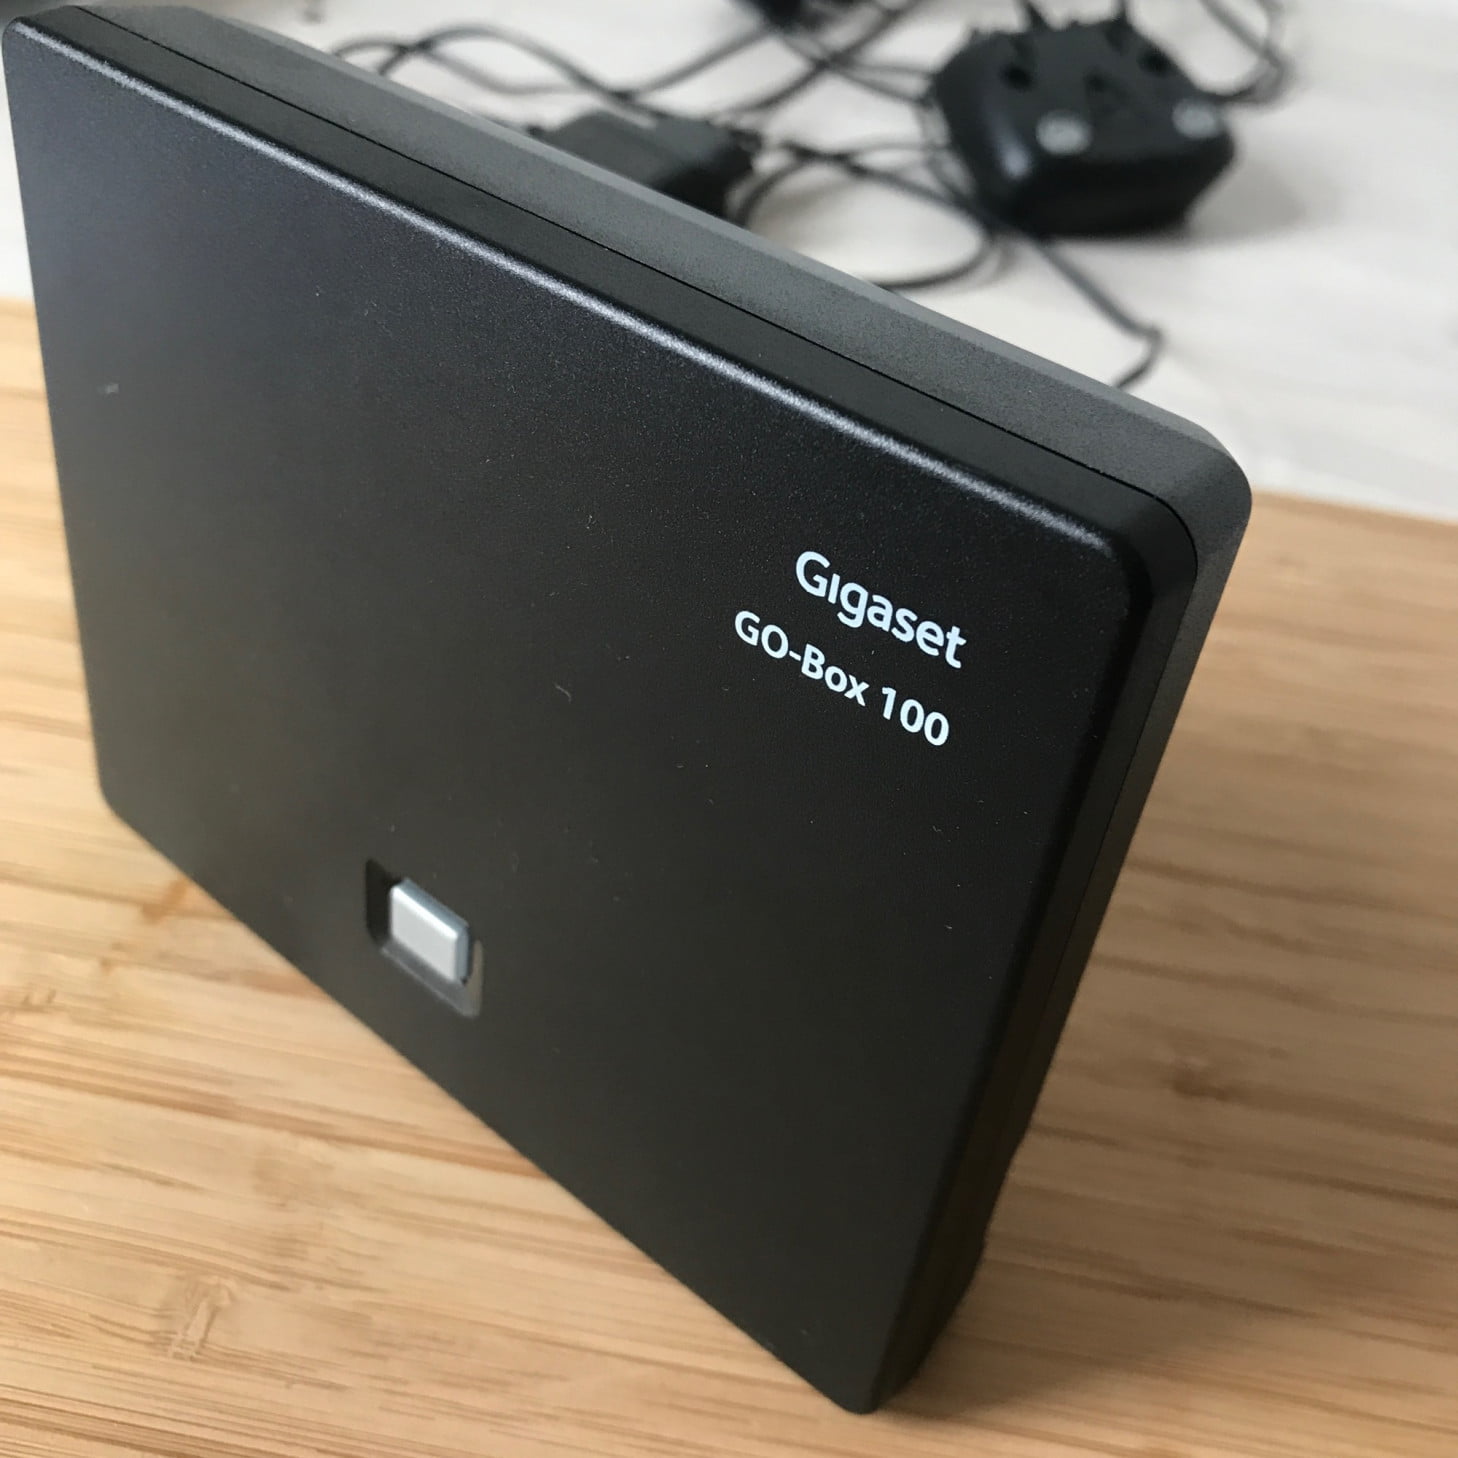 Review: Gigaset Go 📱 mac&egg Voip Box Telephony 100 🖥 DECT tested ⌚️